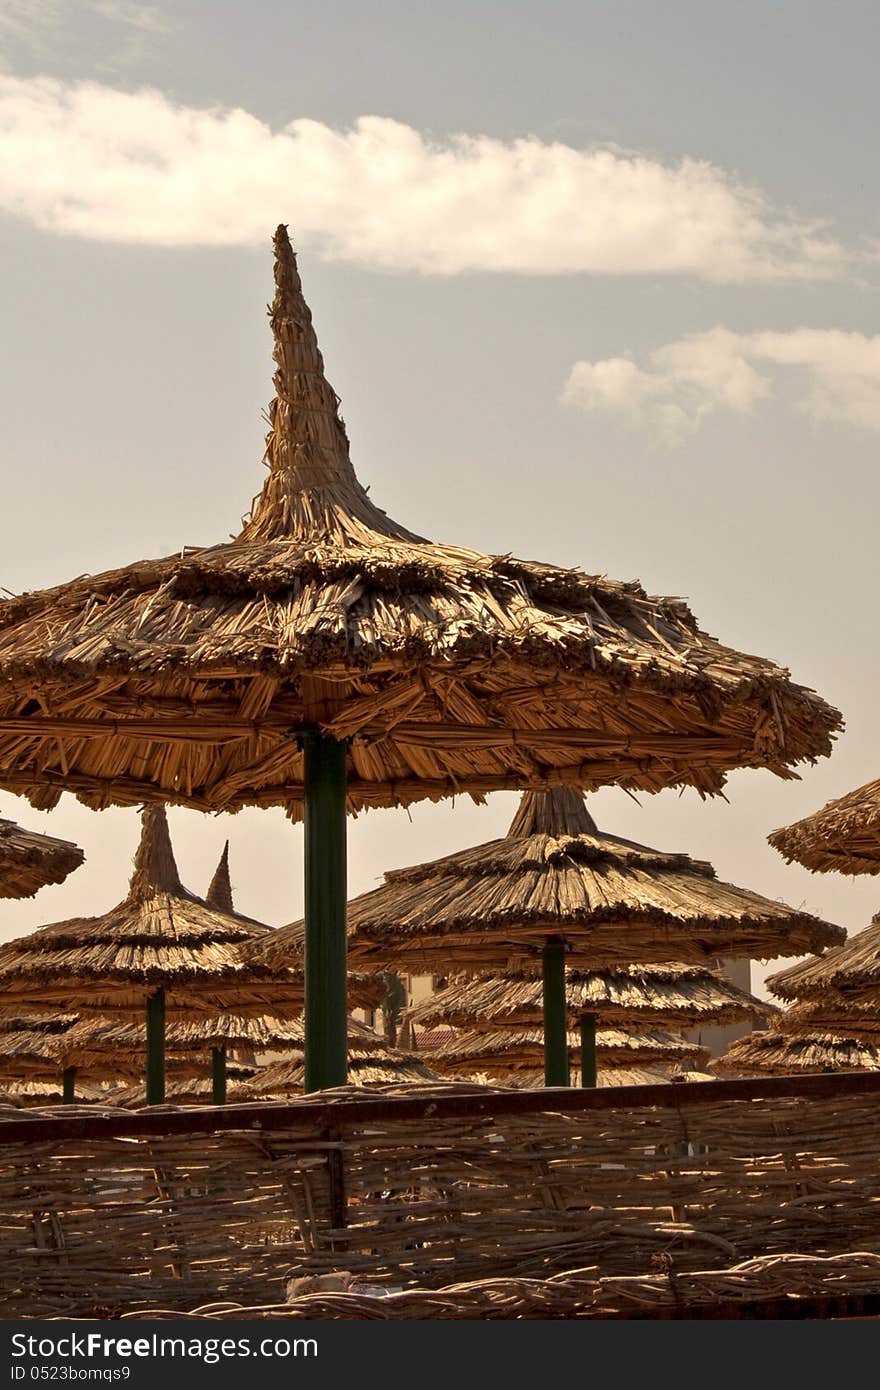 Reed tents on a beach in Egypt